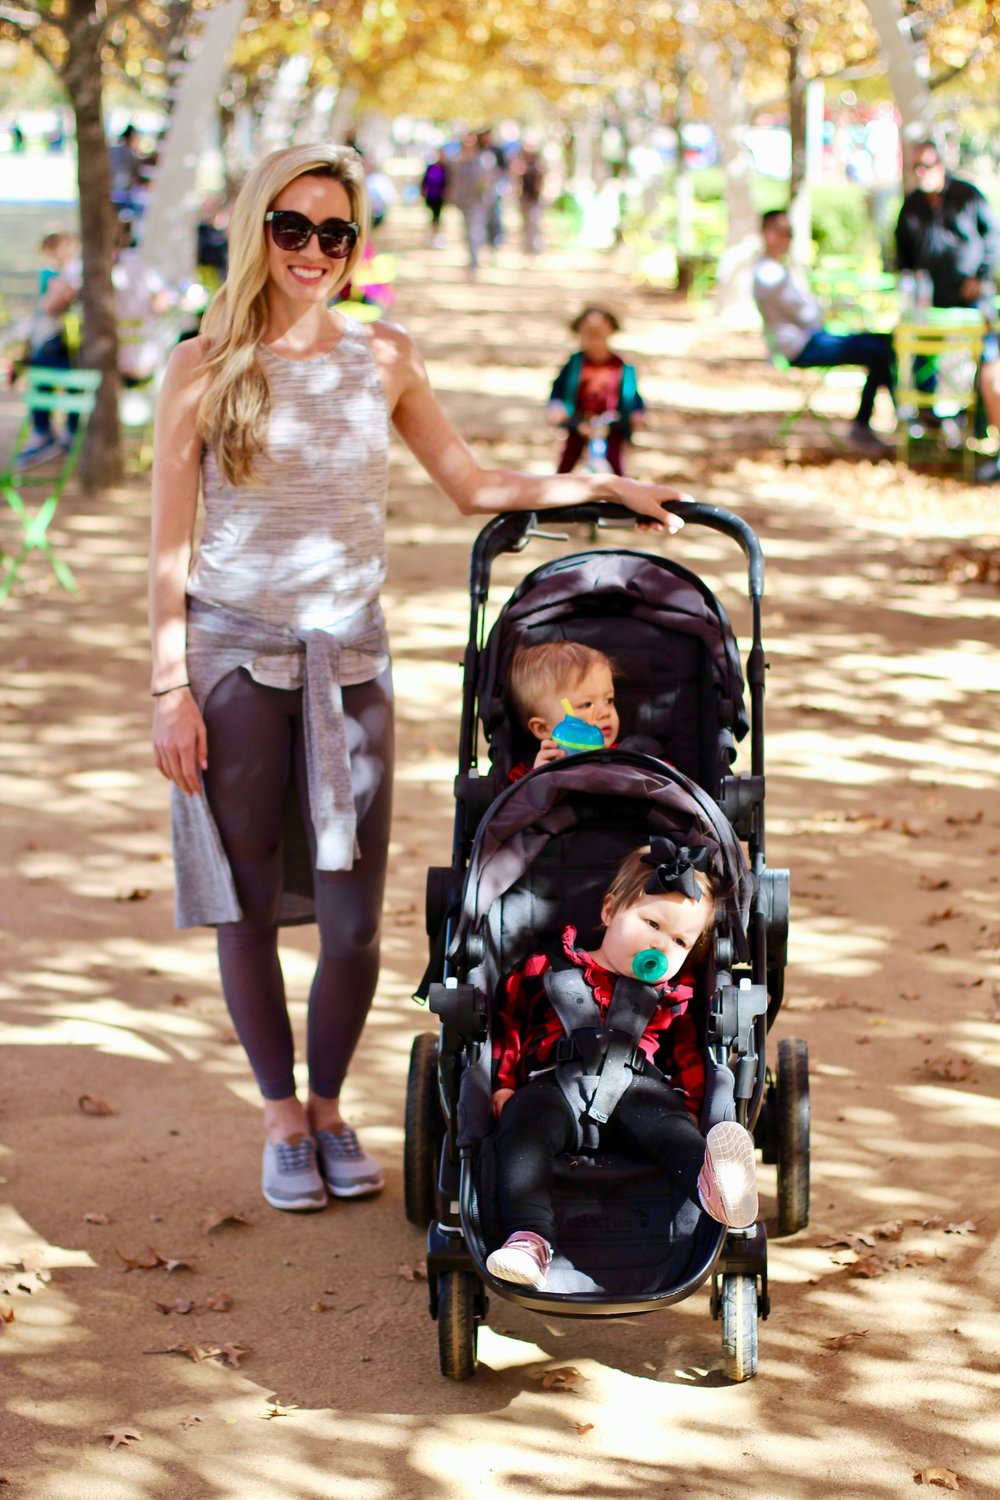 Side-by-side Double Strollers Vs. Tandem Double Strollers: Pros And Cons